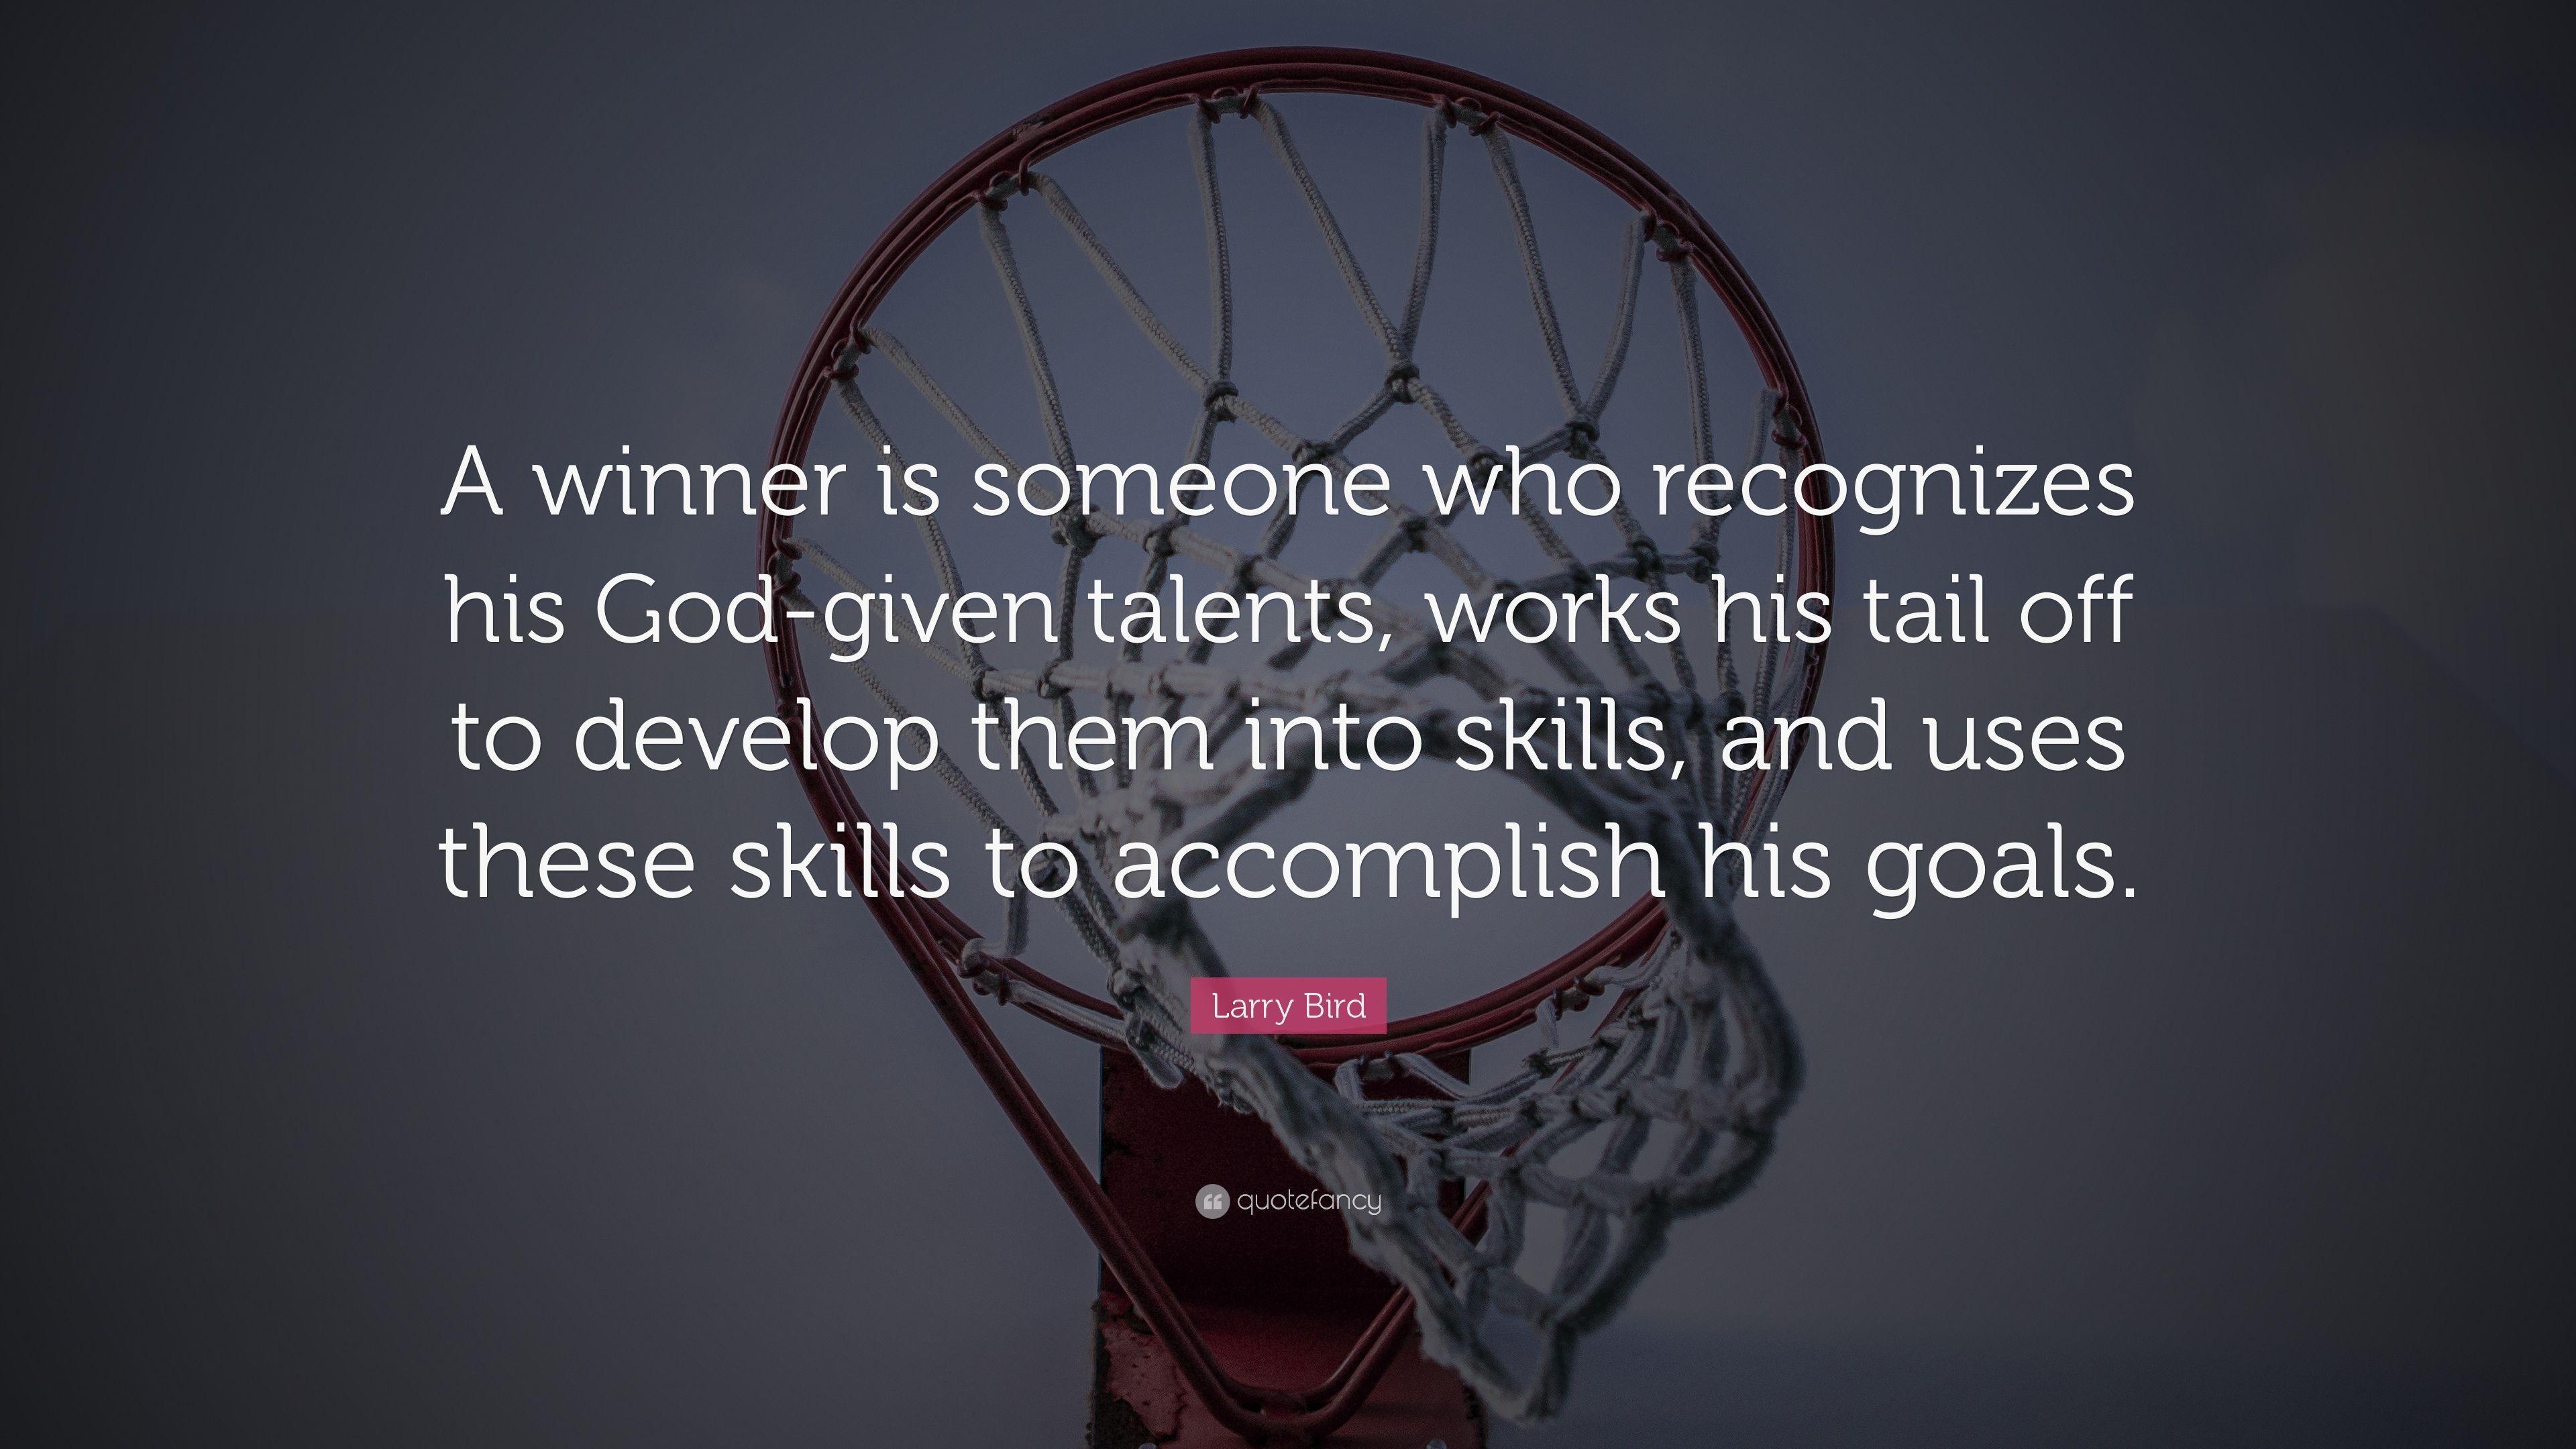 Larry Bird Quote: “A Winner Is Someone Who Recognizes His God Given Talents, Works His Tail Off To Develop Them Into Skills, And Uses These.”